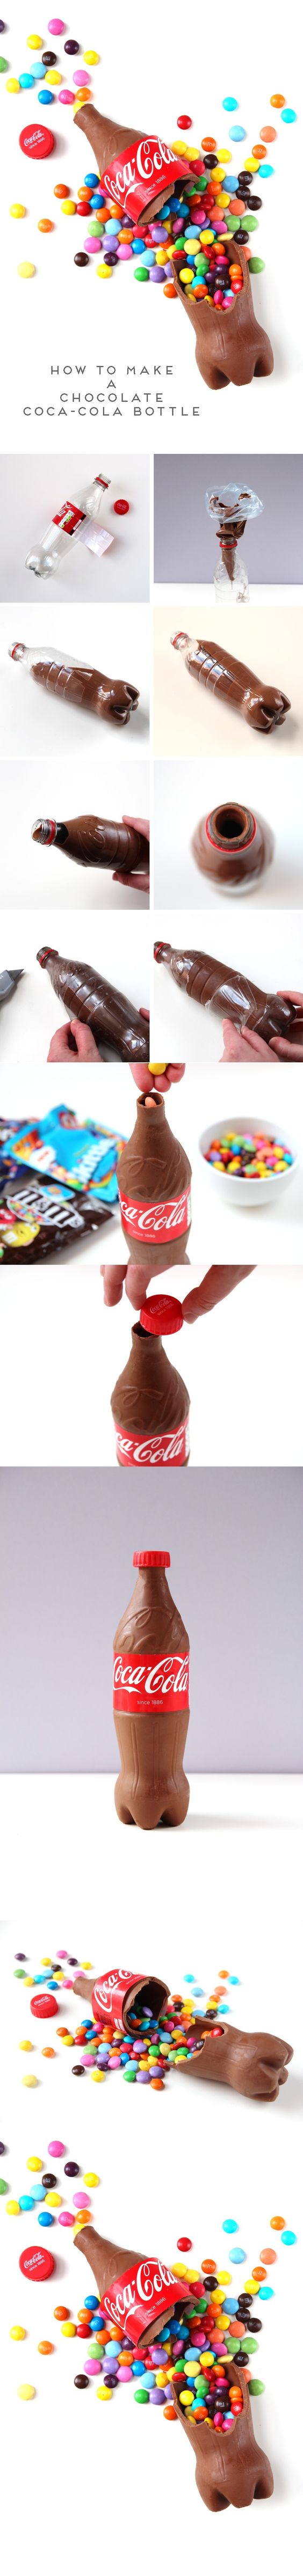 Chocolate Coca-Cola Bottle Filled With Sweets. 